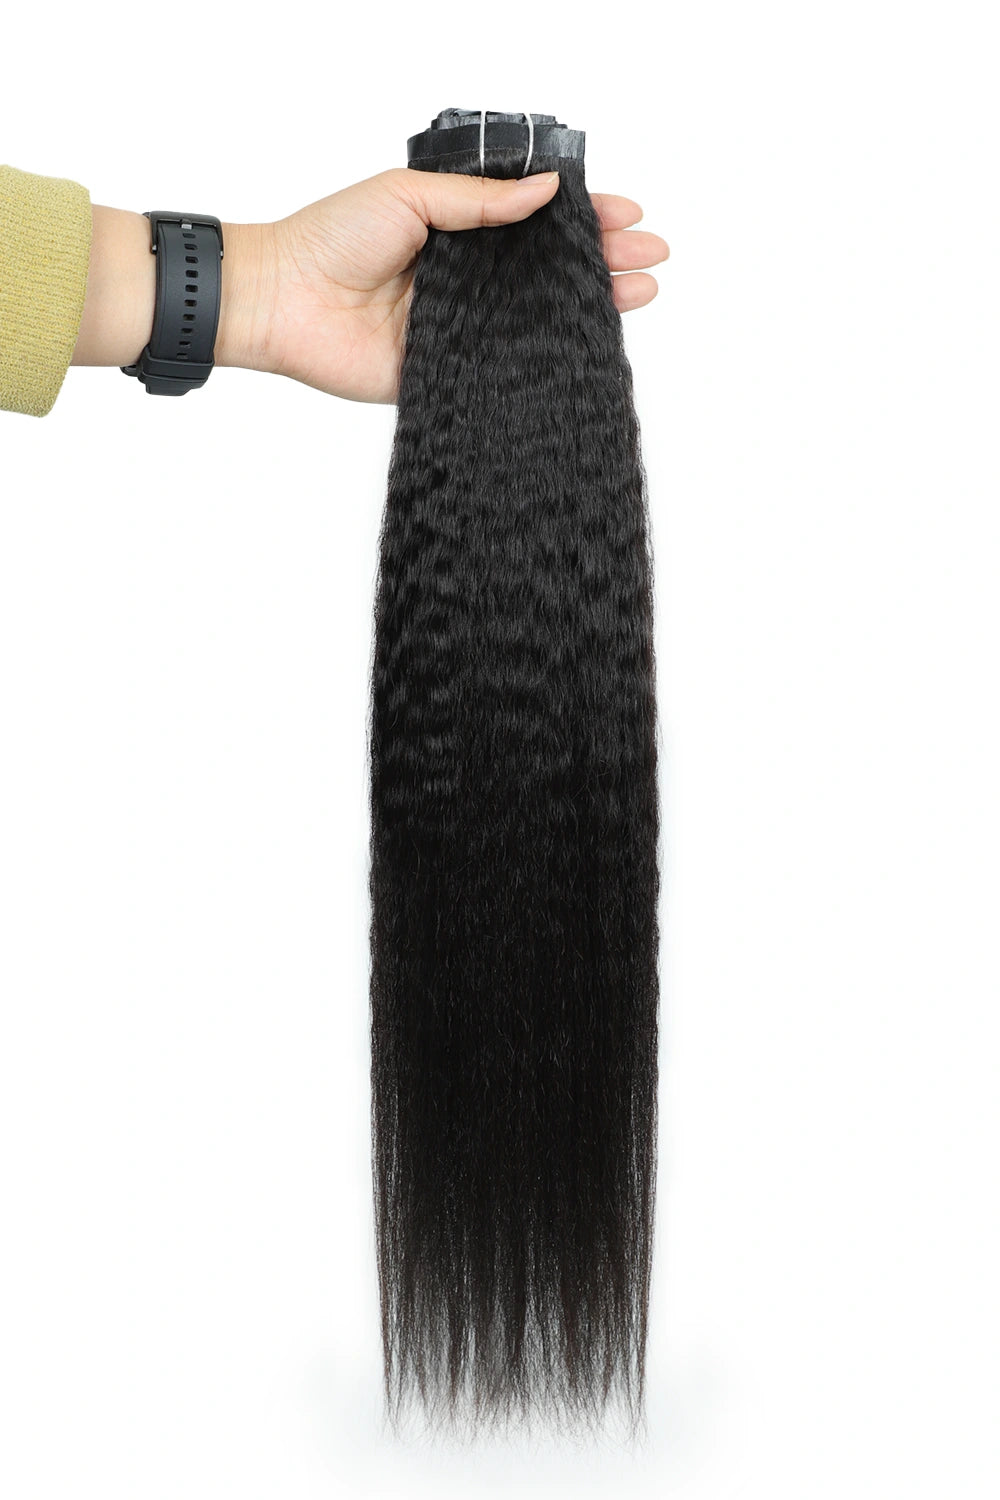 kinky-straight-seamless-clip-in-hair-extensions-natural-black